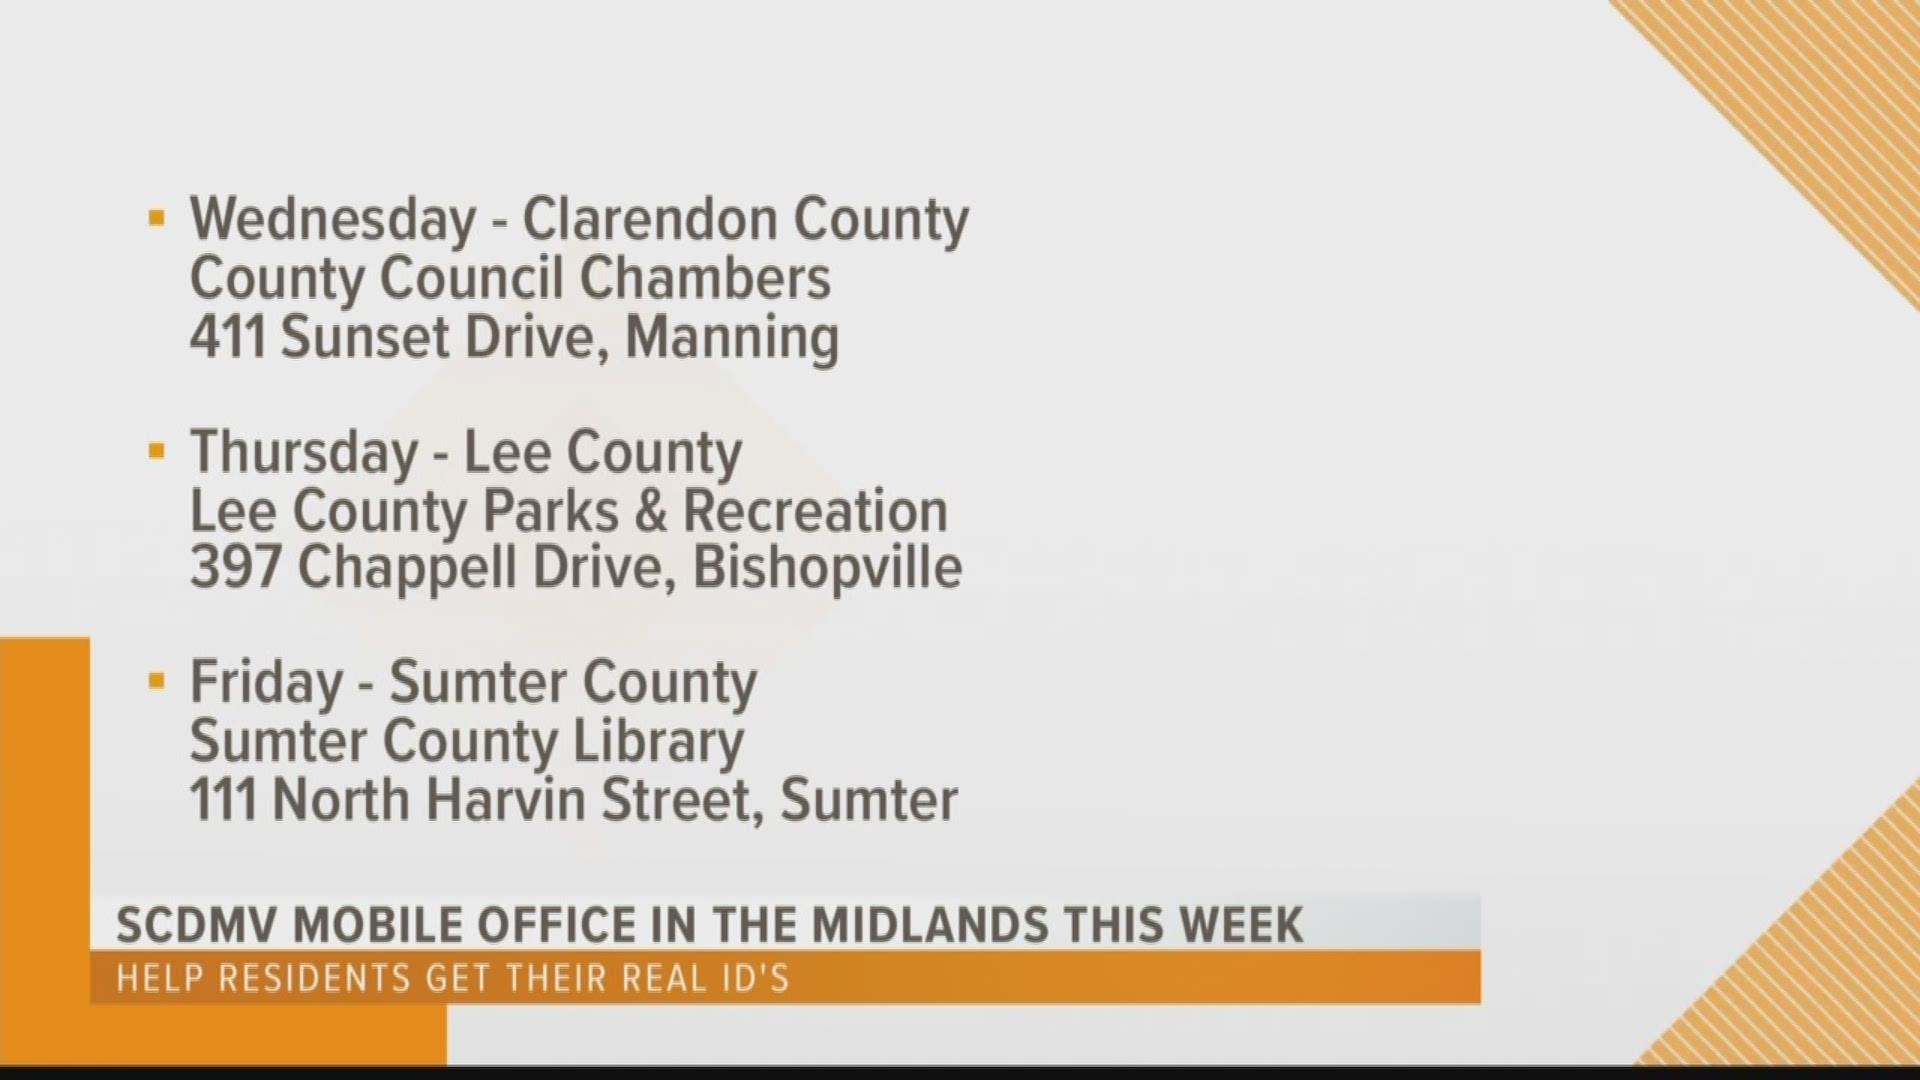 If you are looking to upgrade to the new Real ID, the SCDMV will have their mobile unit in the Midlands beginning February 12, 2020.